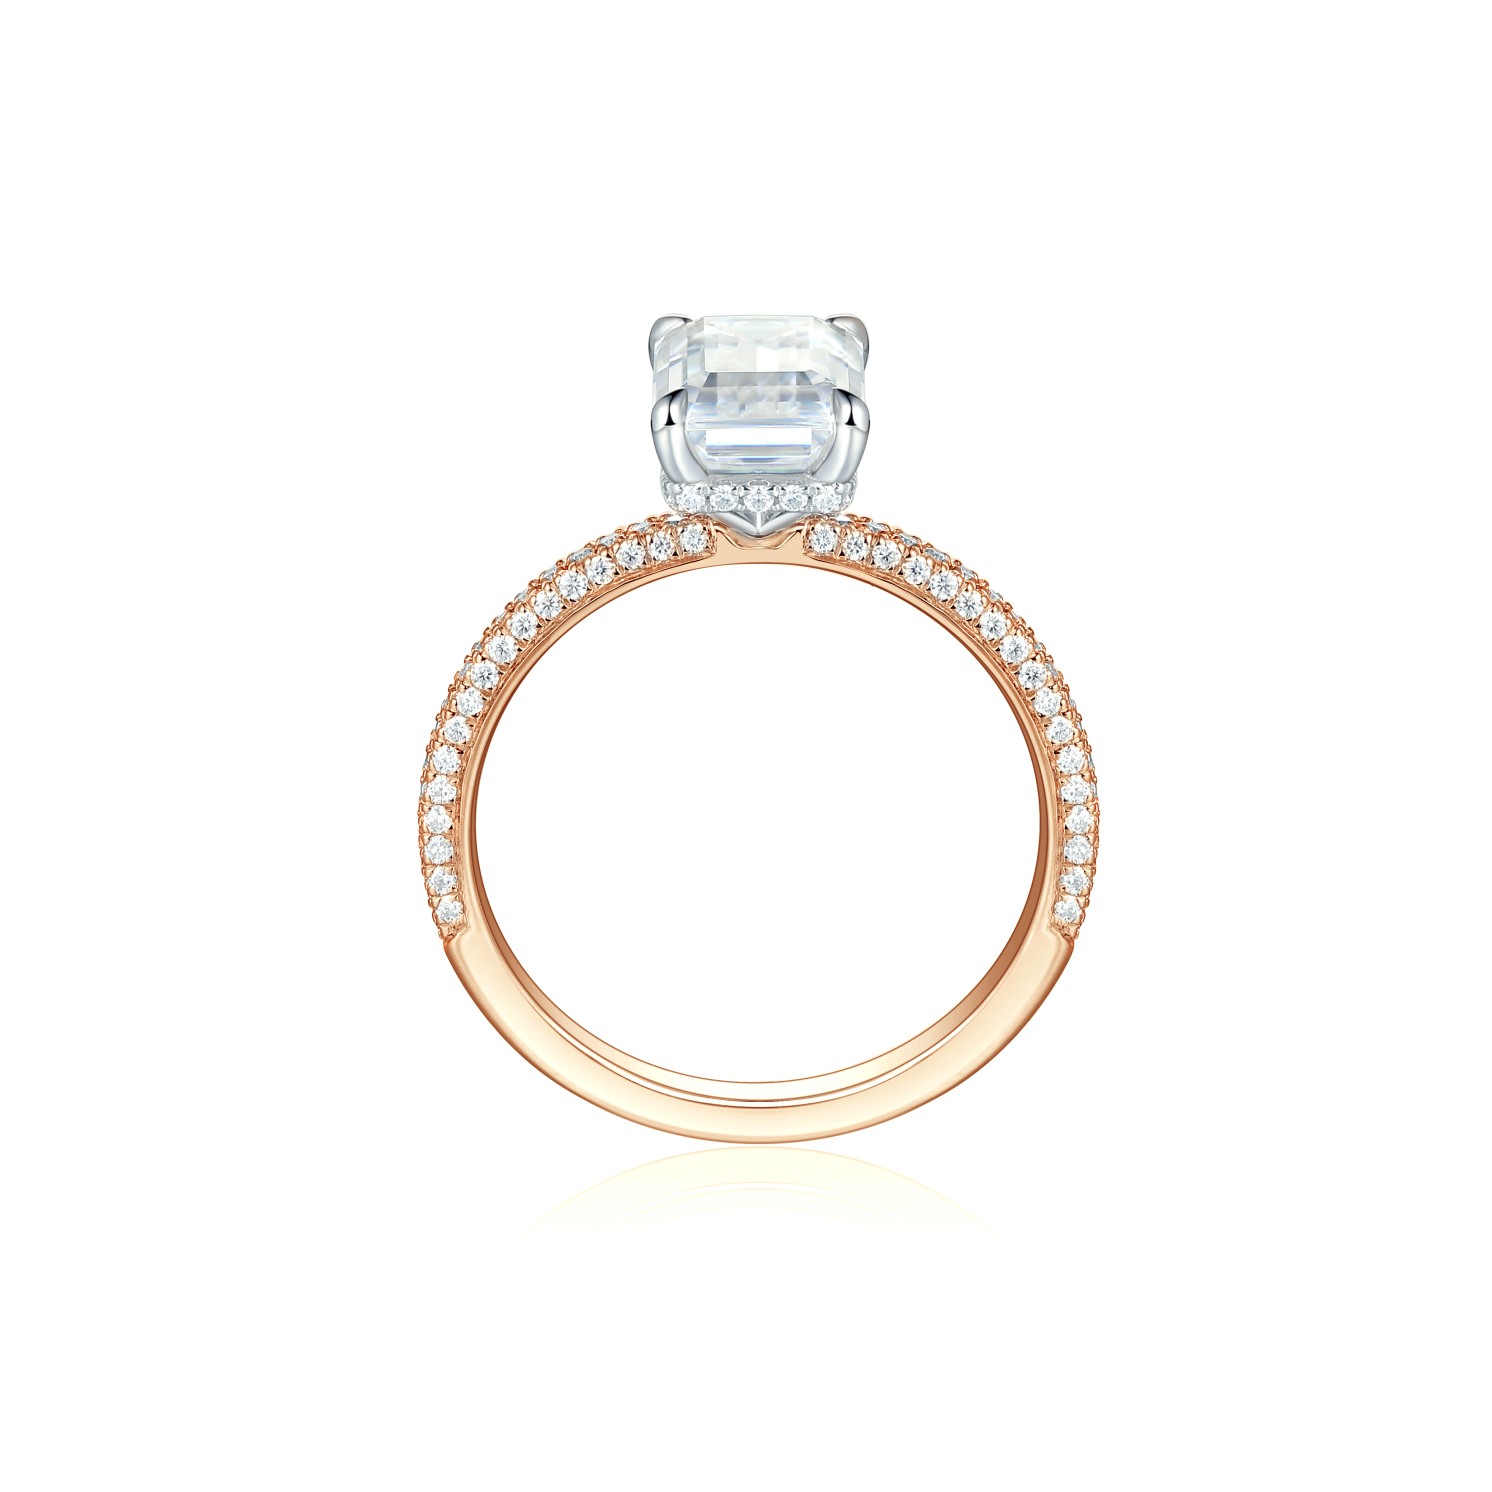 Veridian - Emerald Cut Moissanite Ring With Pavé-Set Band